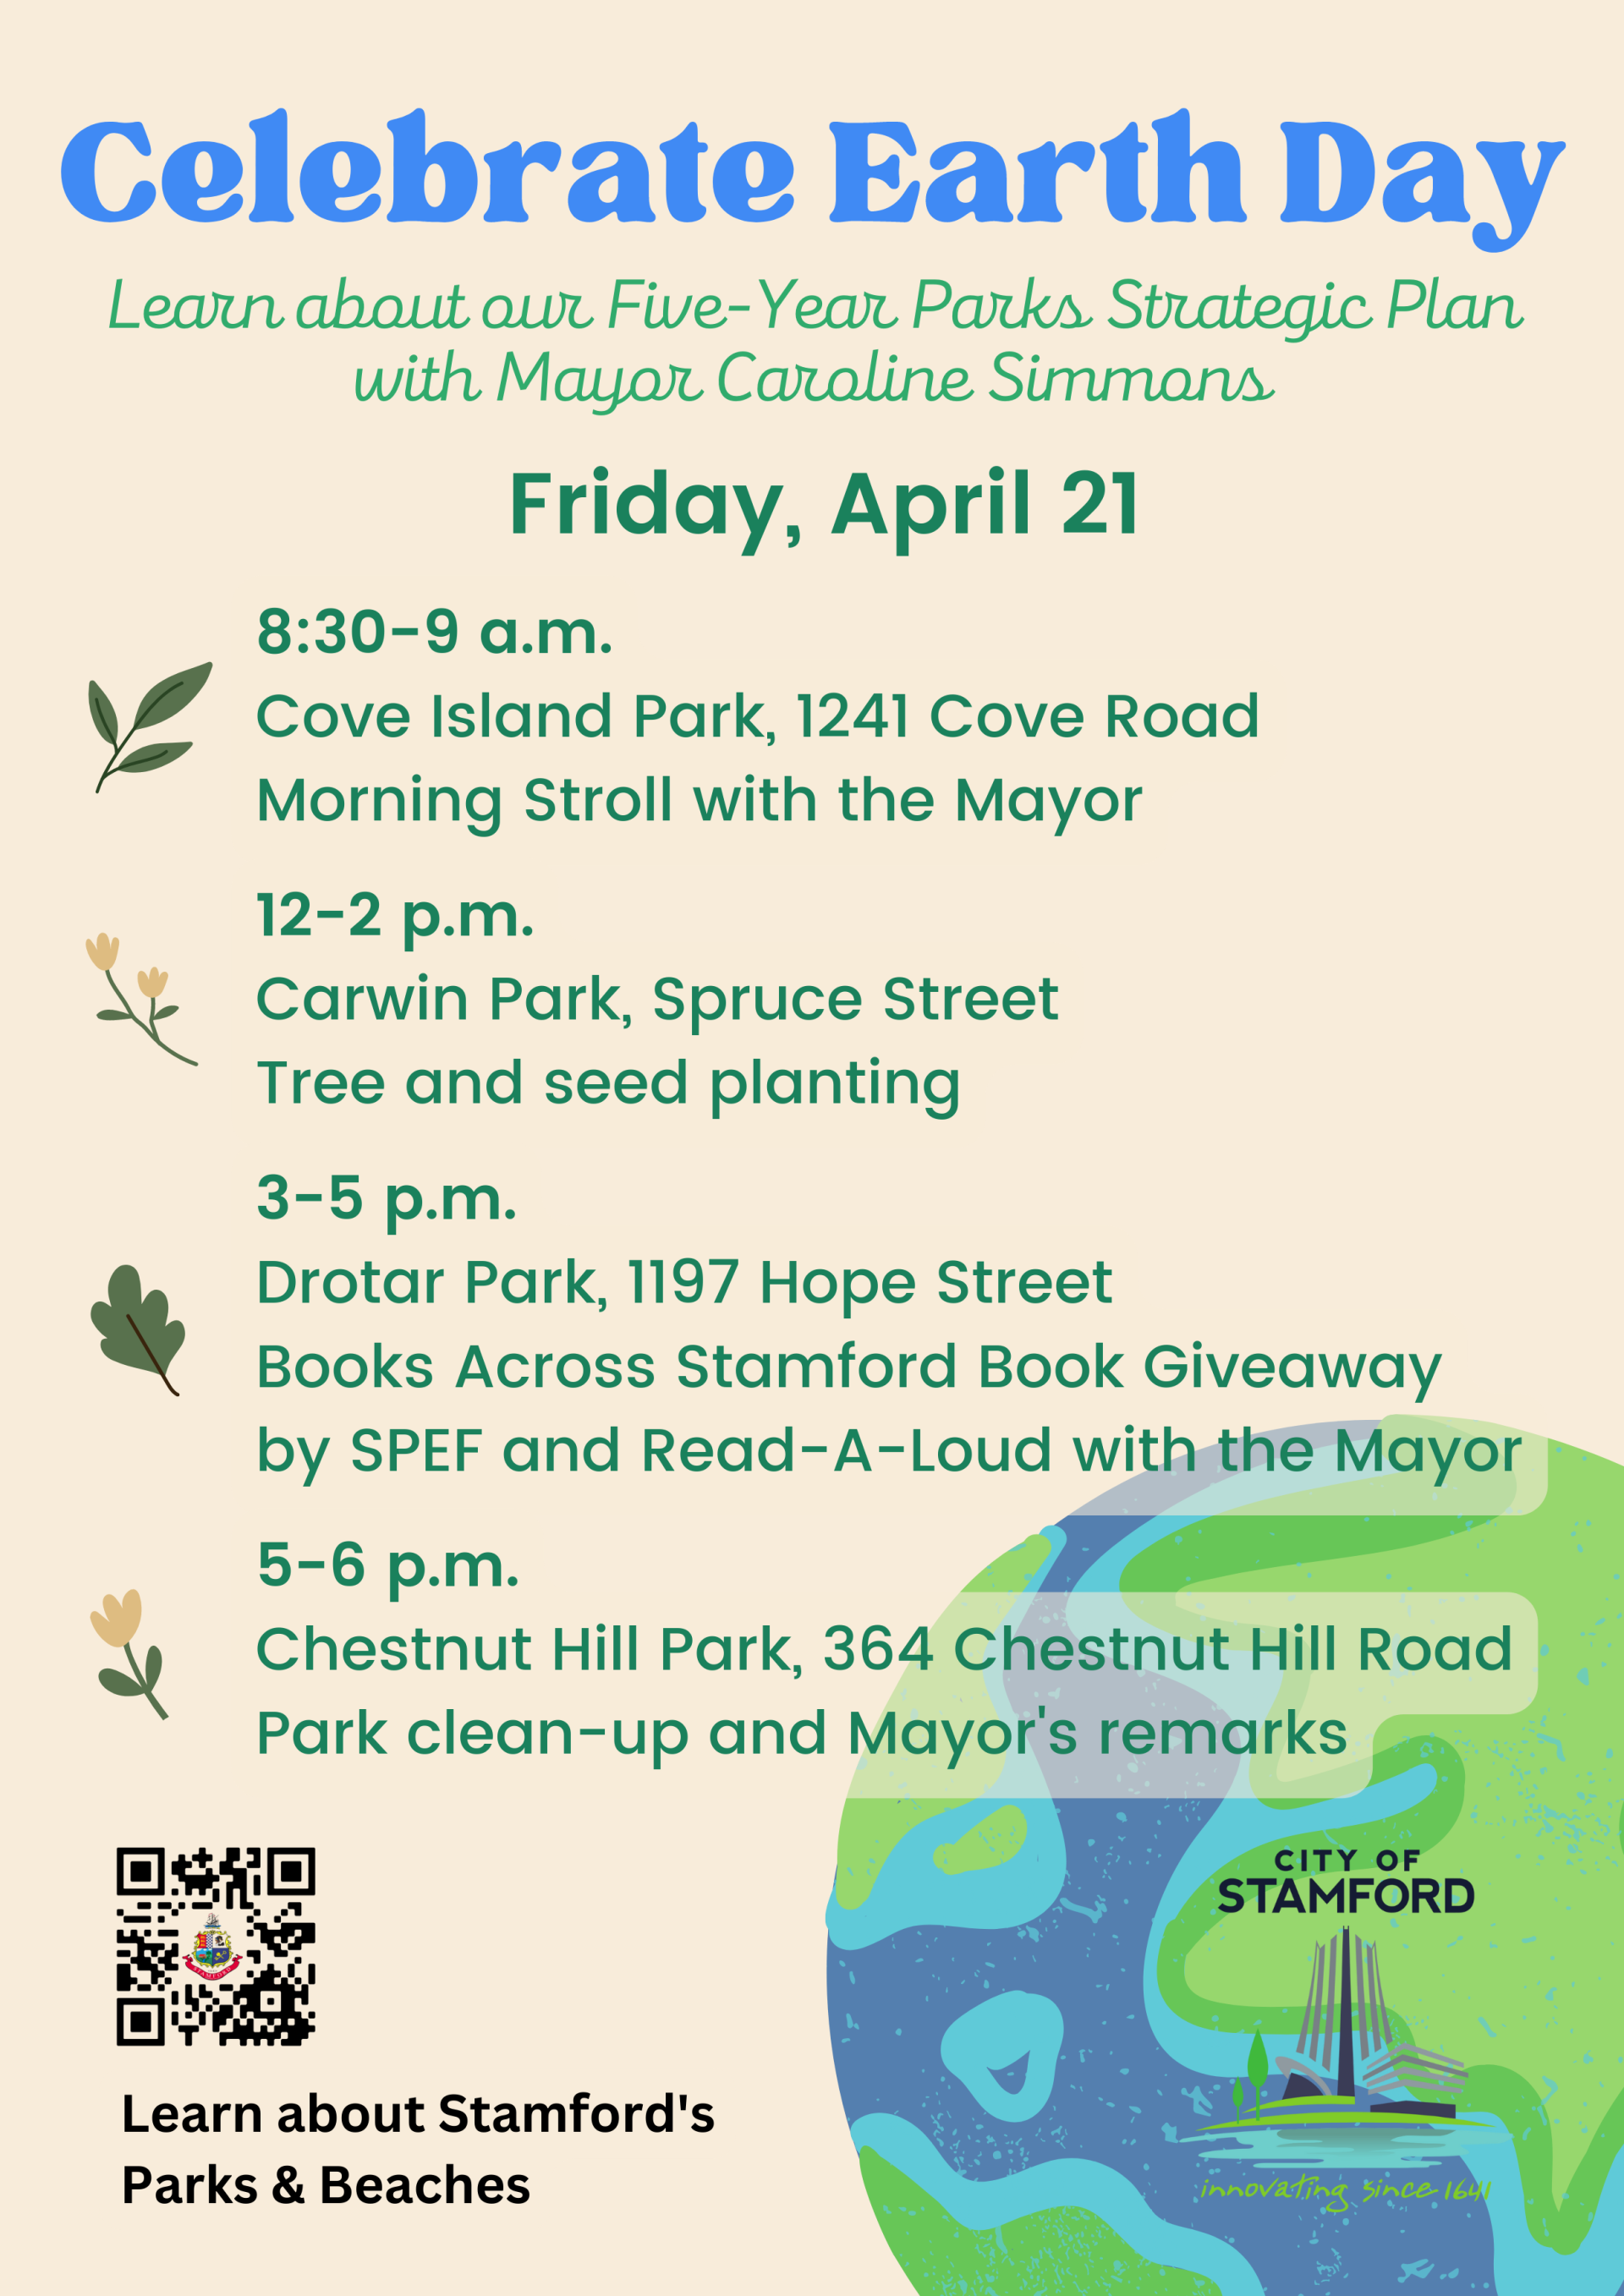 Earth Day Events in Stamford on April 21